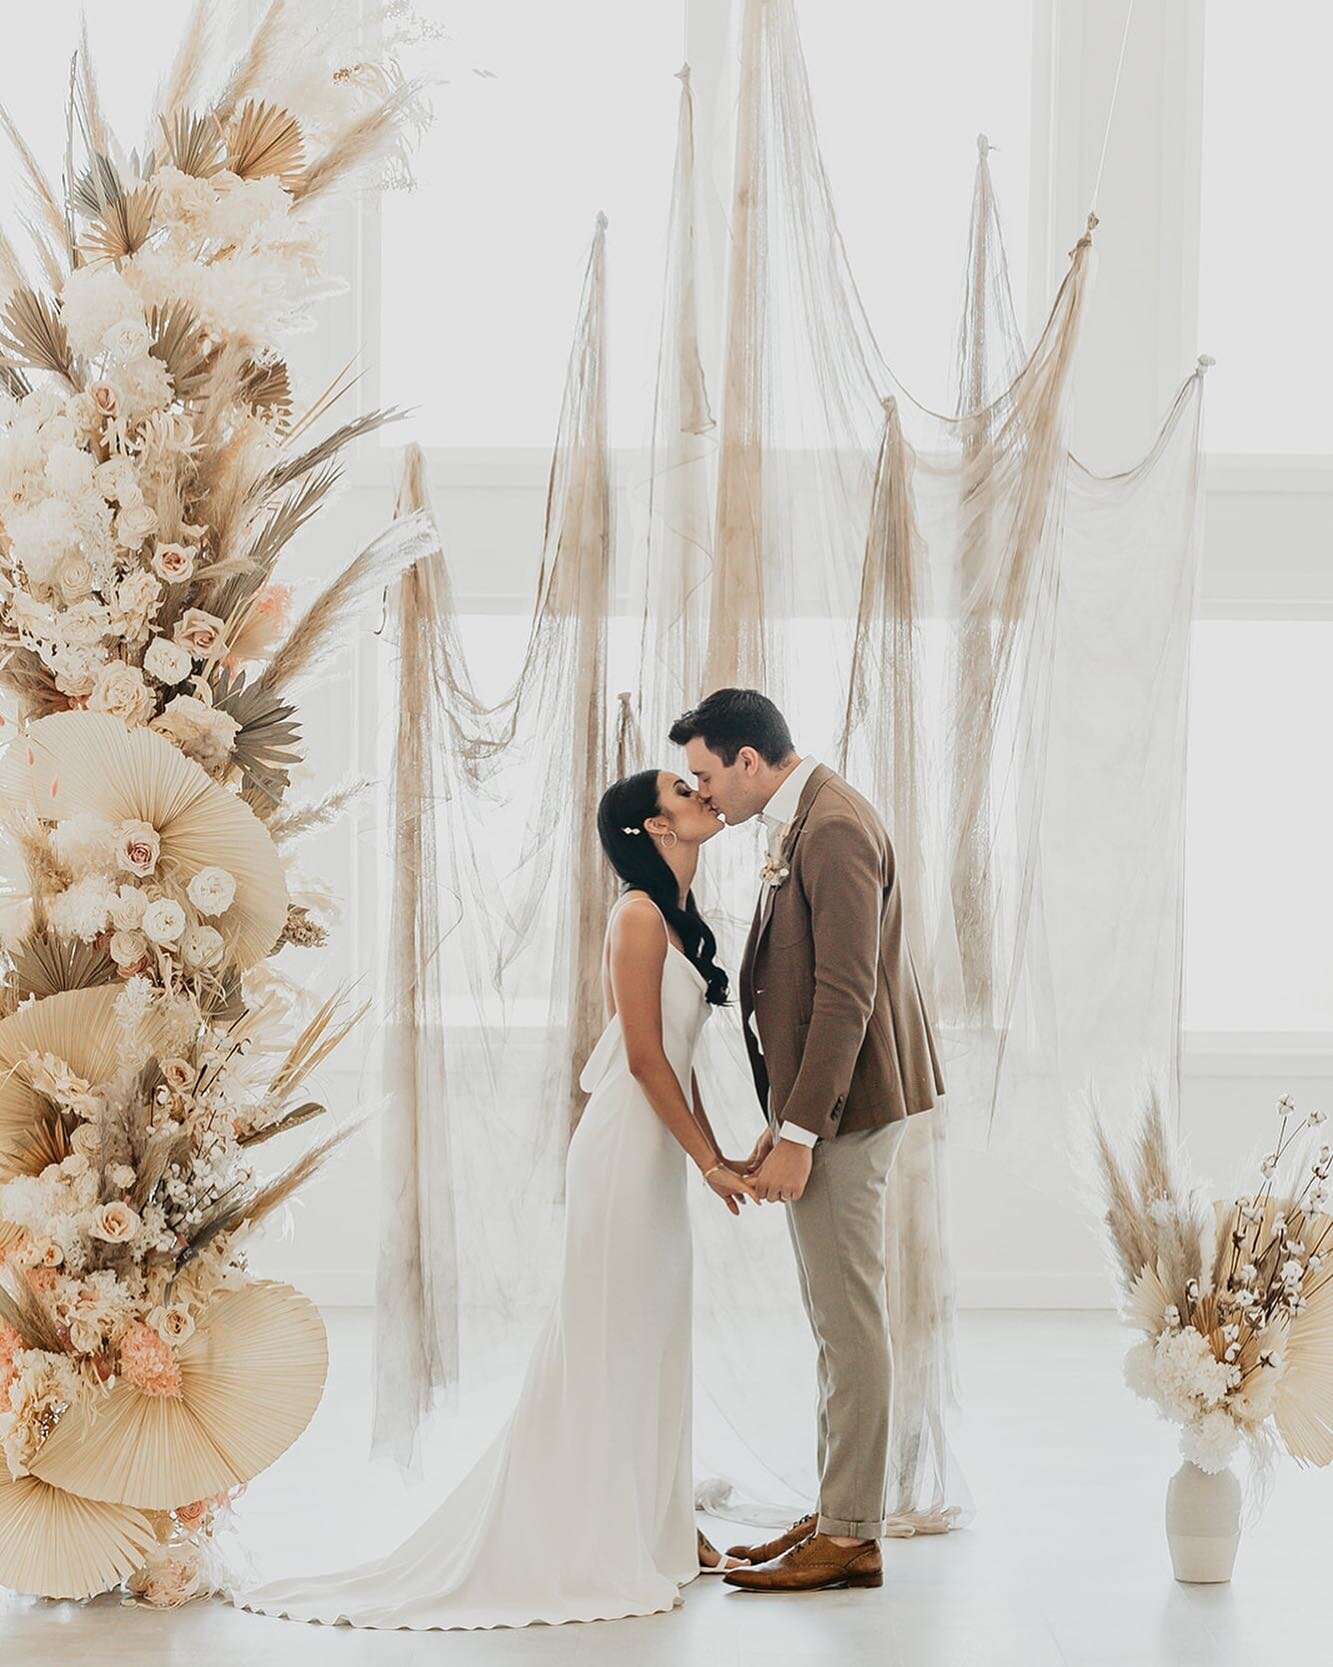 That perfect light + our Cocoa Cloud hand-dyed tapestries = the dreamiest ceremony backdrop at the @tinroofeventcentre ✨ styled by @mdawndesigns &amp; @nikkicollettephoto.

Click on our LOOKBOOK (link in bio👆🏼) to see the full gallery.

Featured on